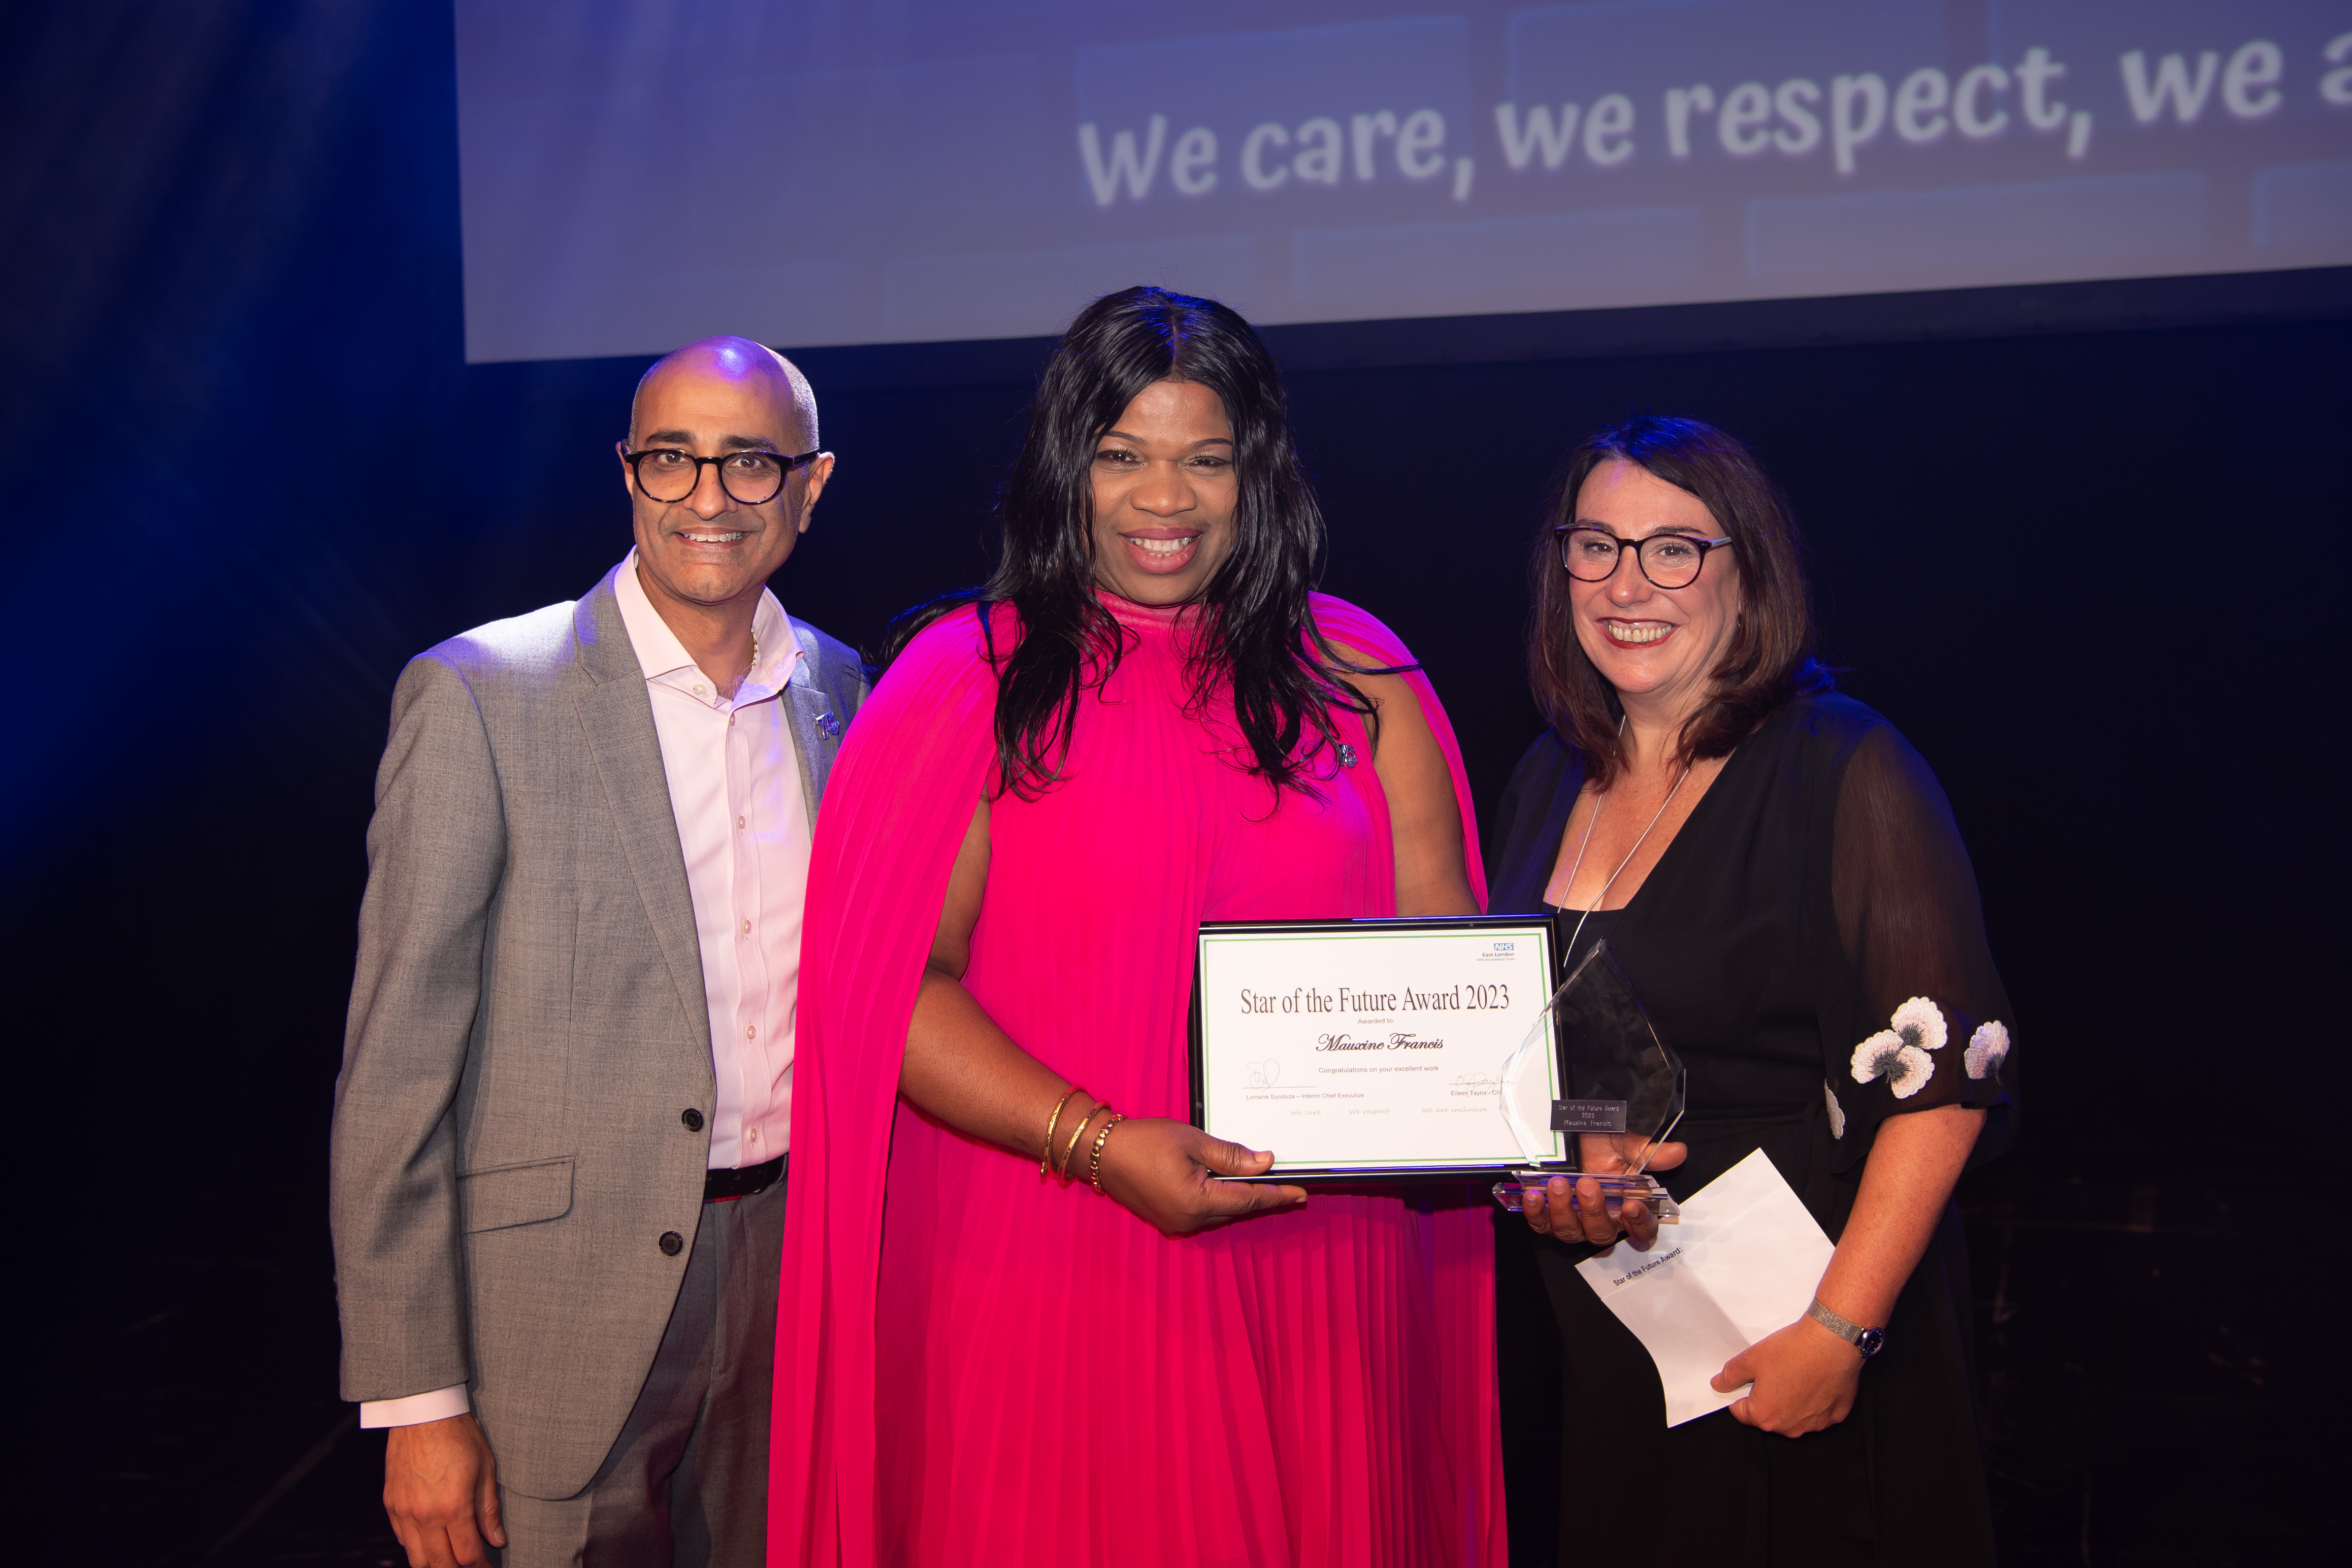 Photo of Mauxine Francis from Community Health Services Tower Hamlets, with her 'Star of the Future' Award.